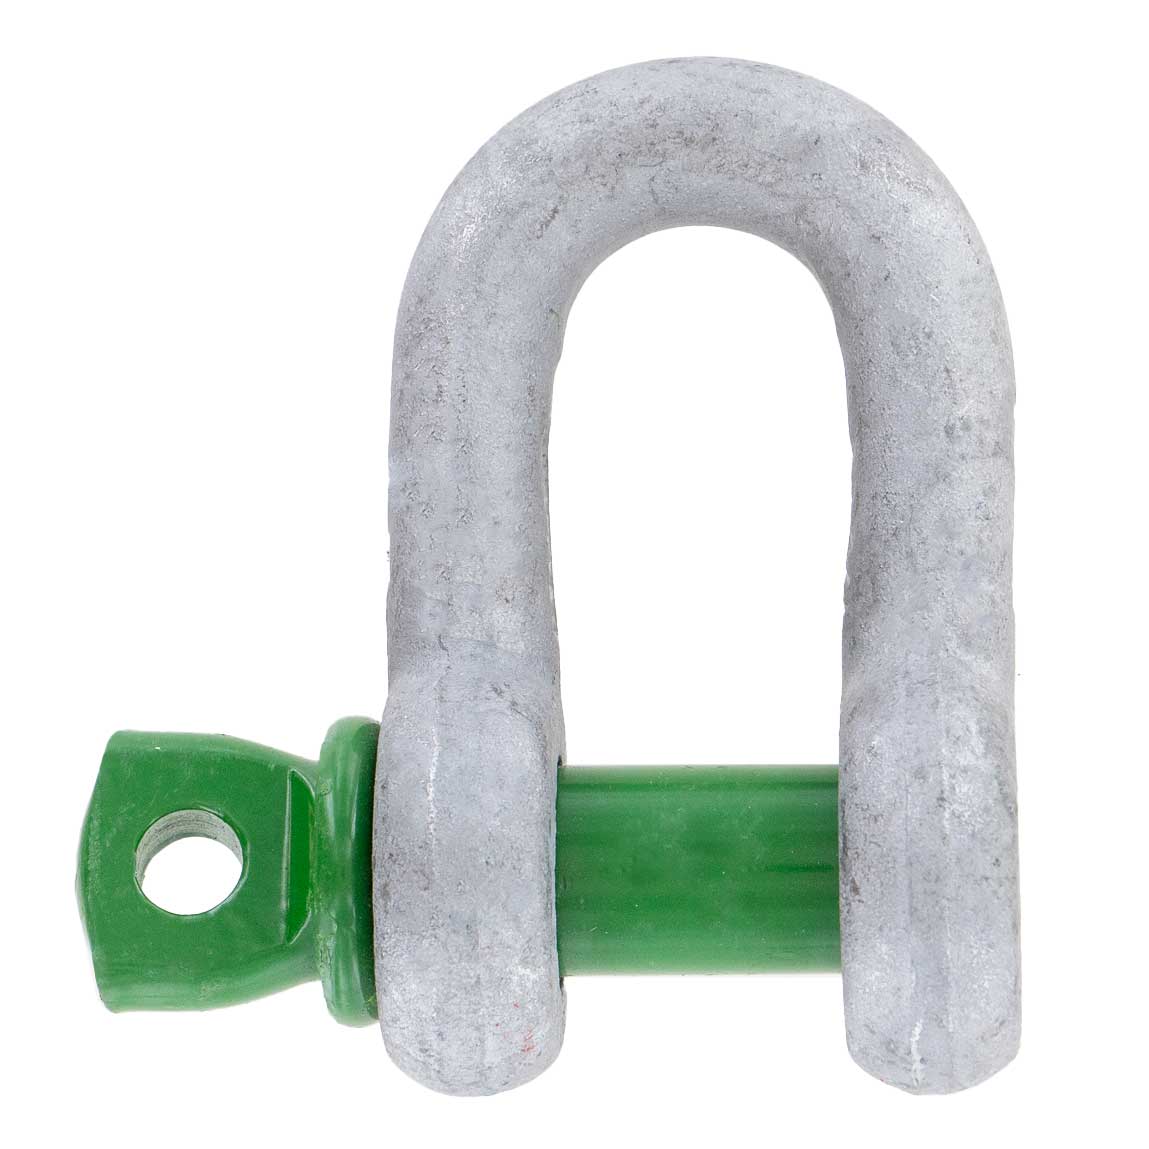 2-1/2" Van Beest Green Pin® Screw Pin Chain Shackle | G-4151 - 55 Ton rear view